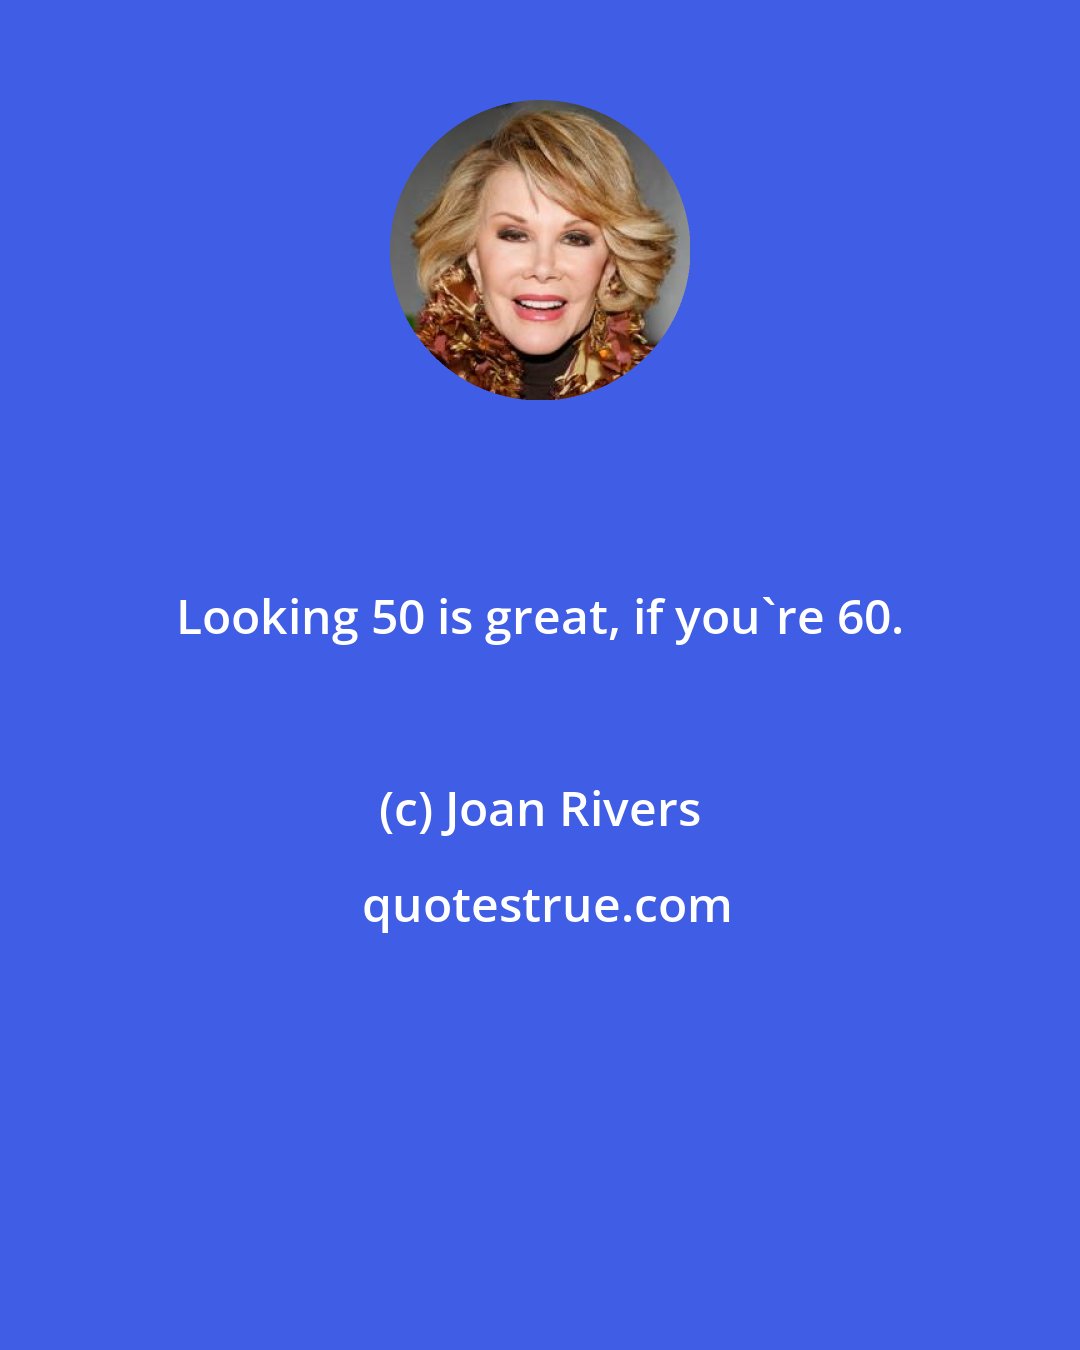 Joan Rivers: Looking 50 is great, if you're 60.